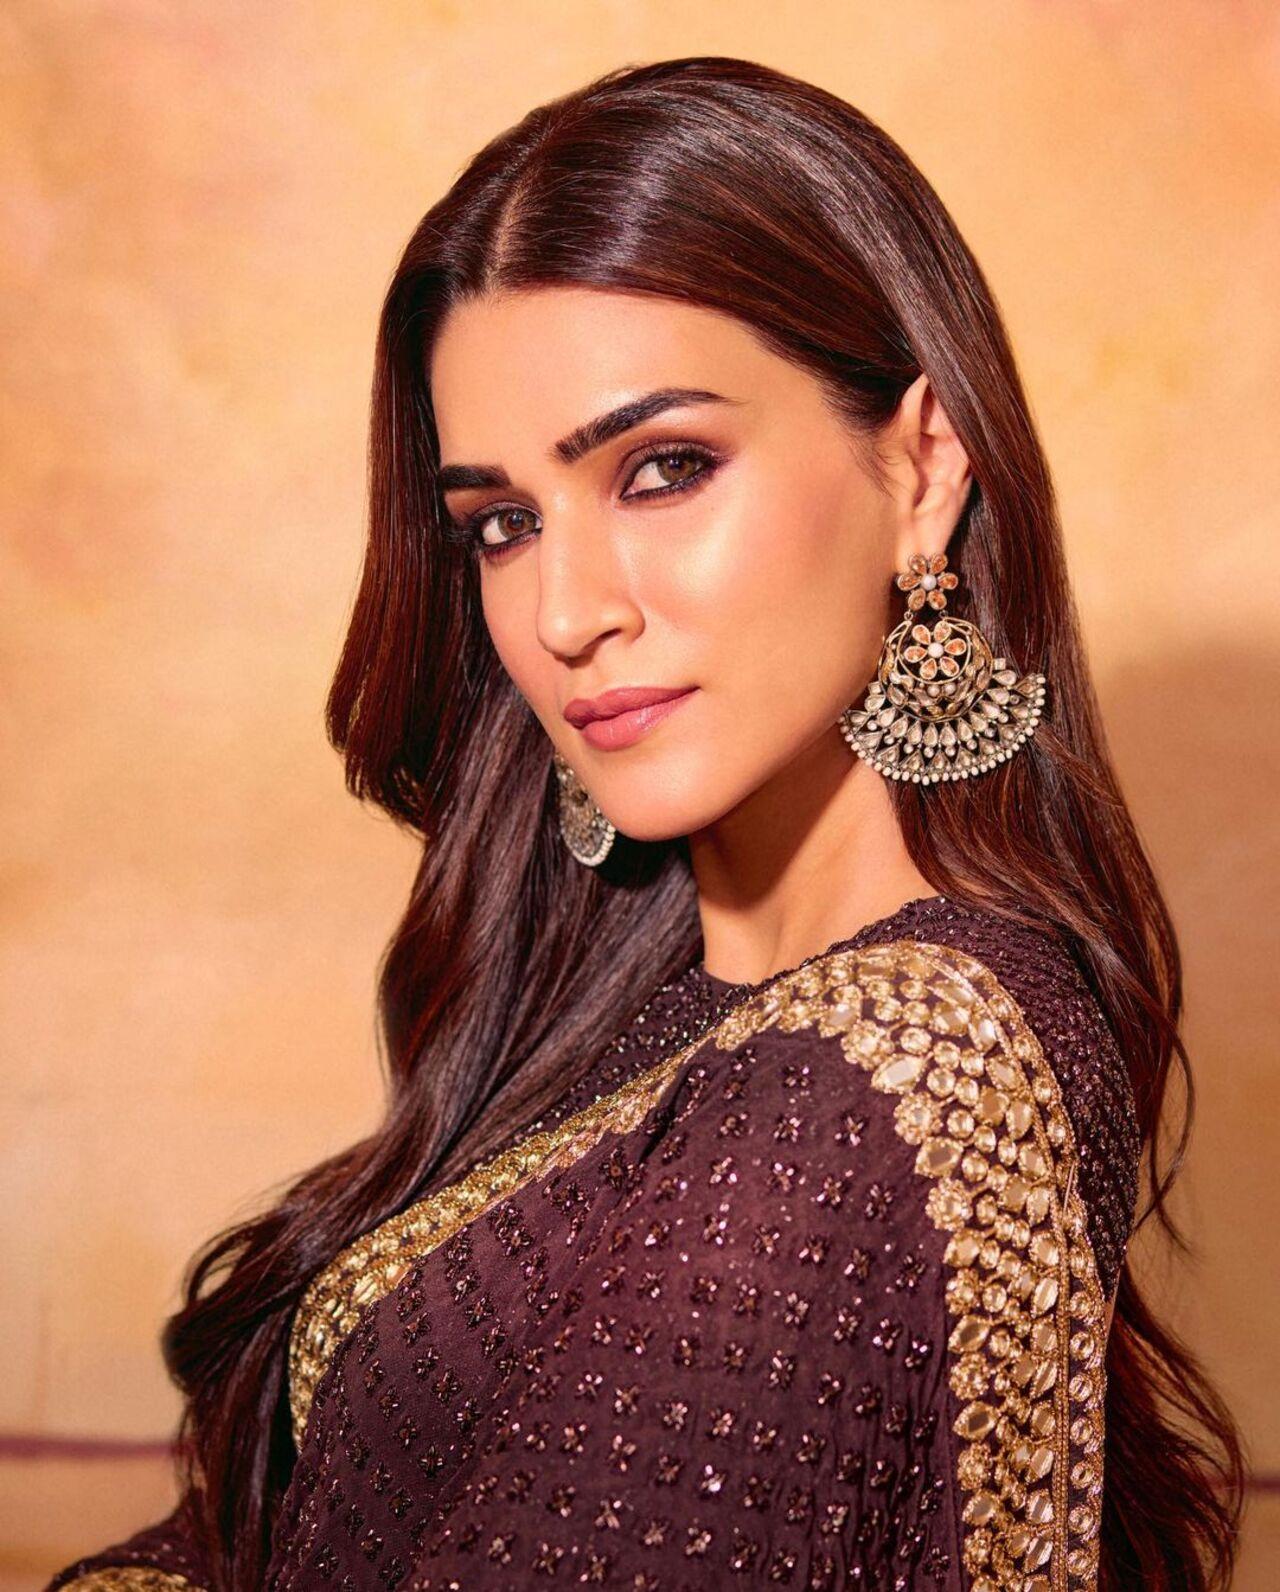 For her look, Kriti chose to have smoky eyes, paired with nude lipstick, and subtle makeup